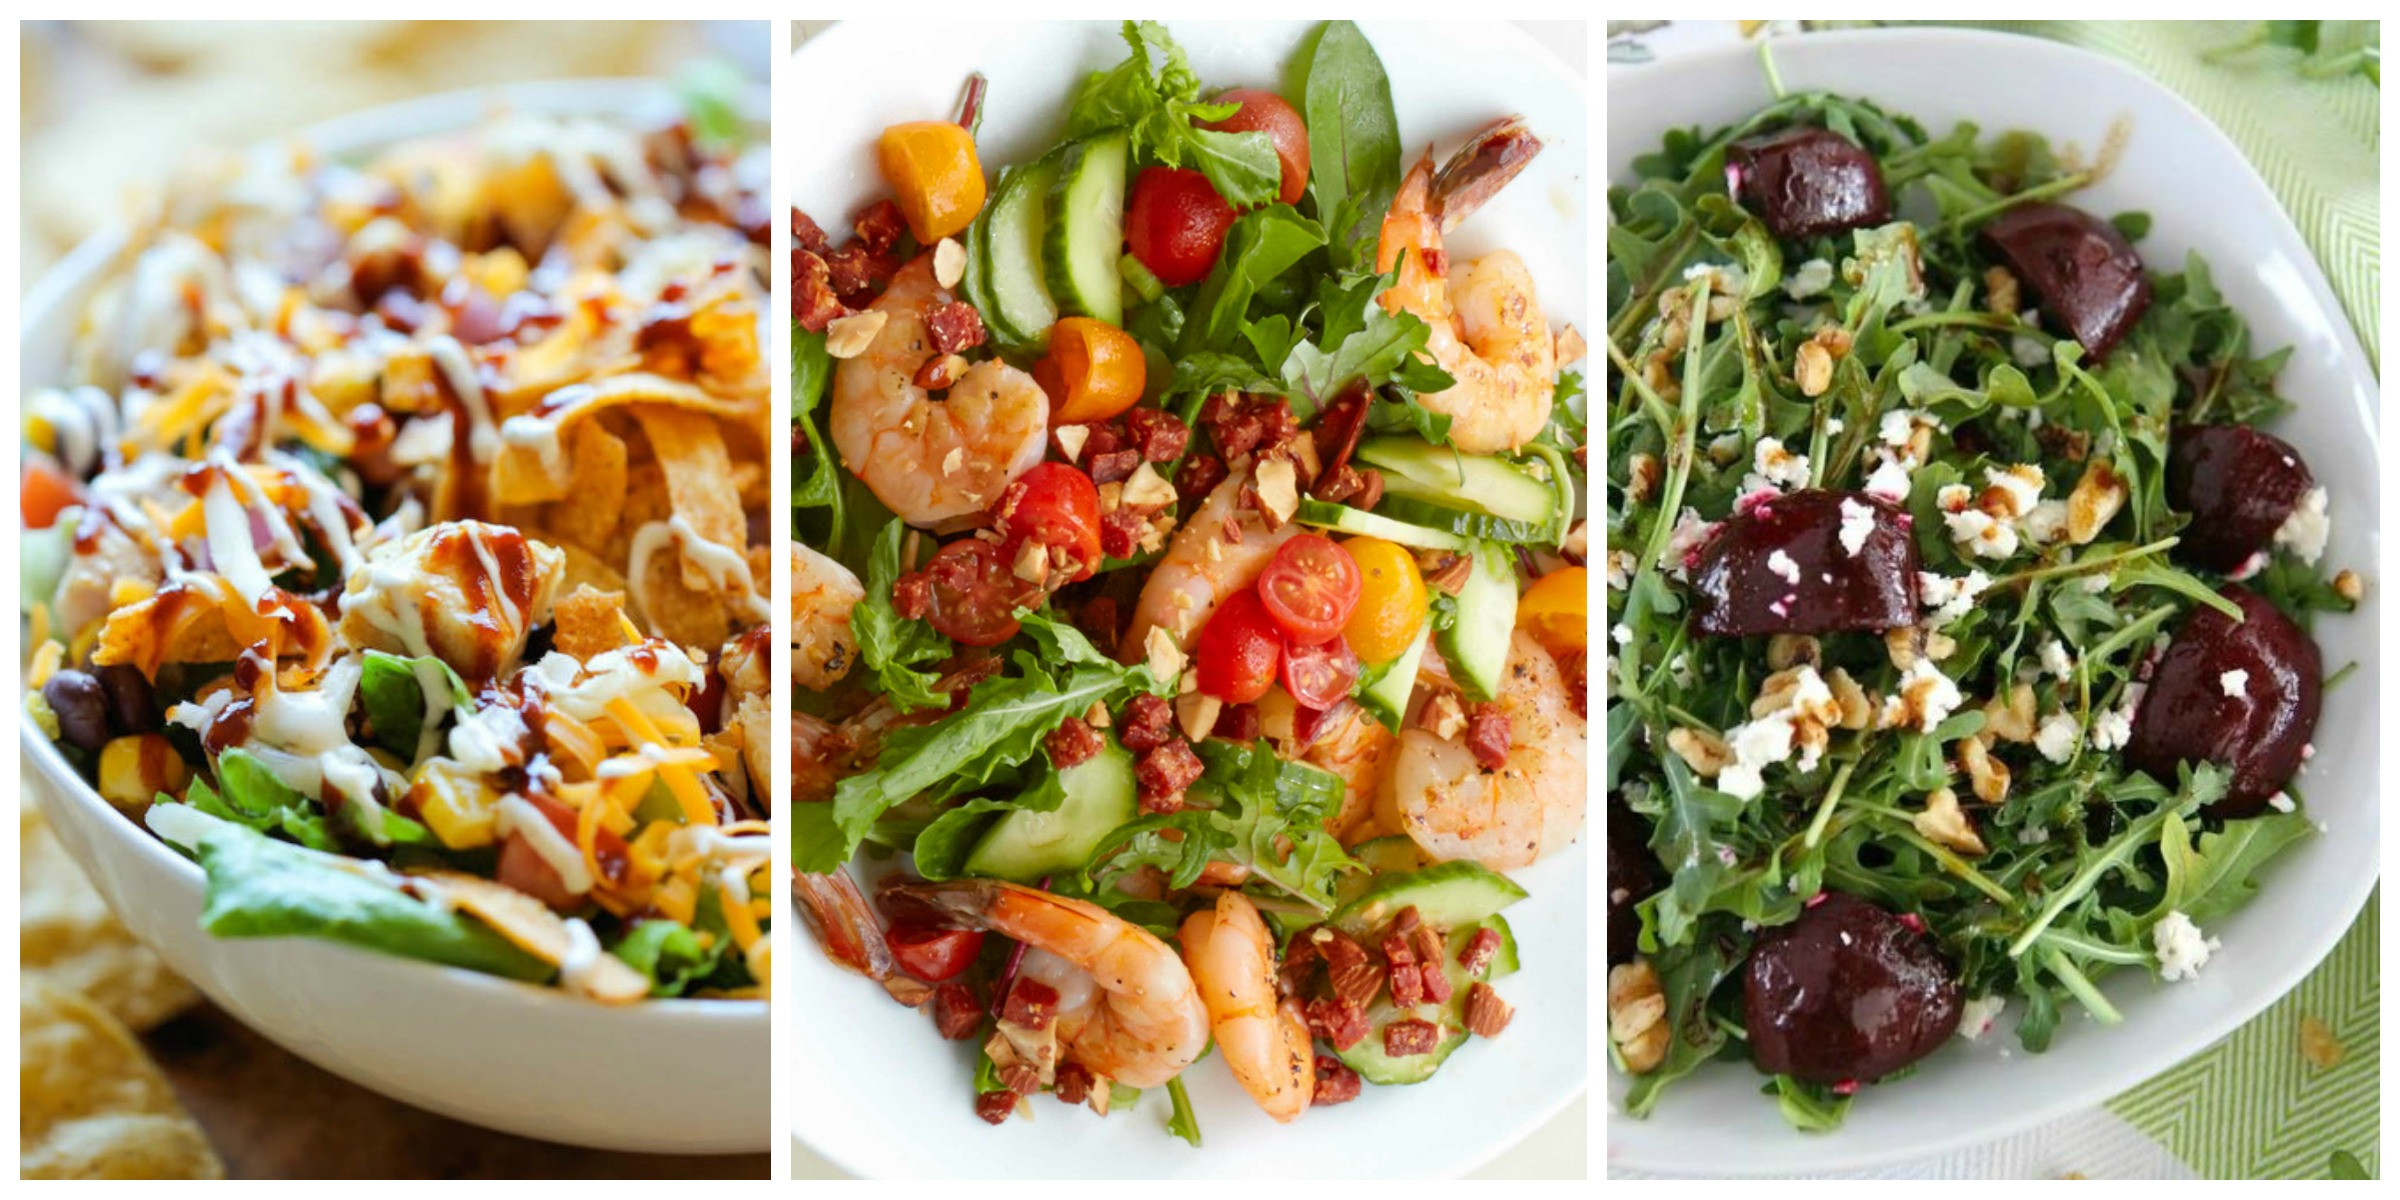 Dinner Salad Recipes
 22 Best Salads for Dinner Easy Recipes for Hearty Salads